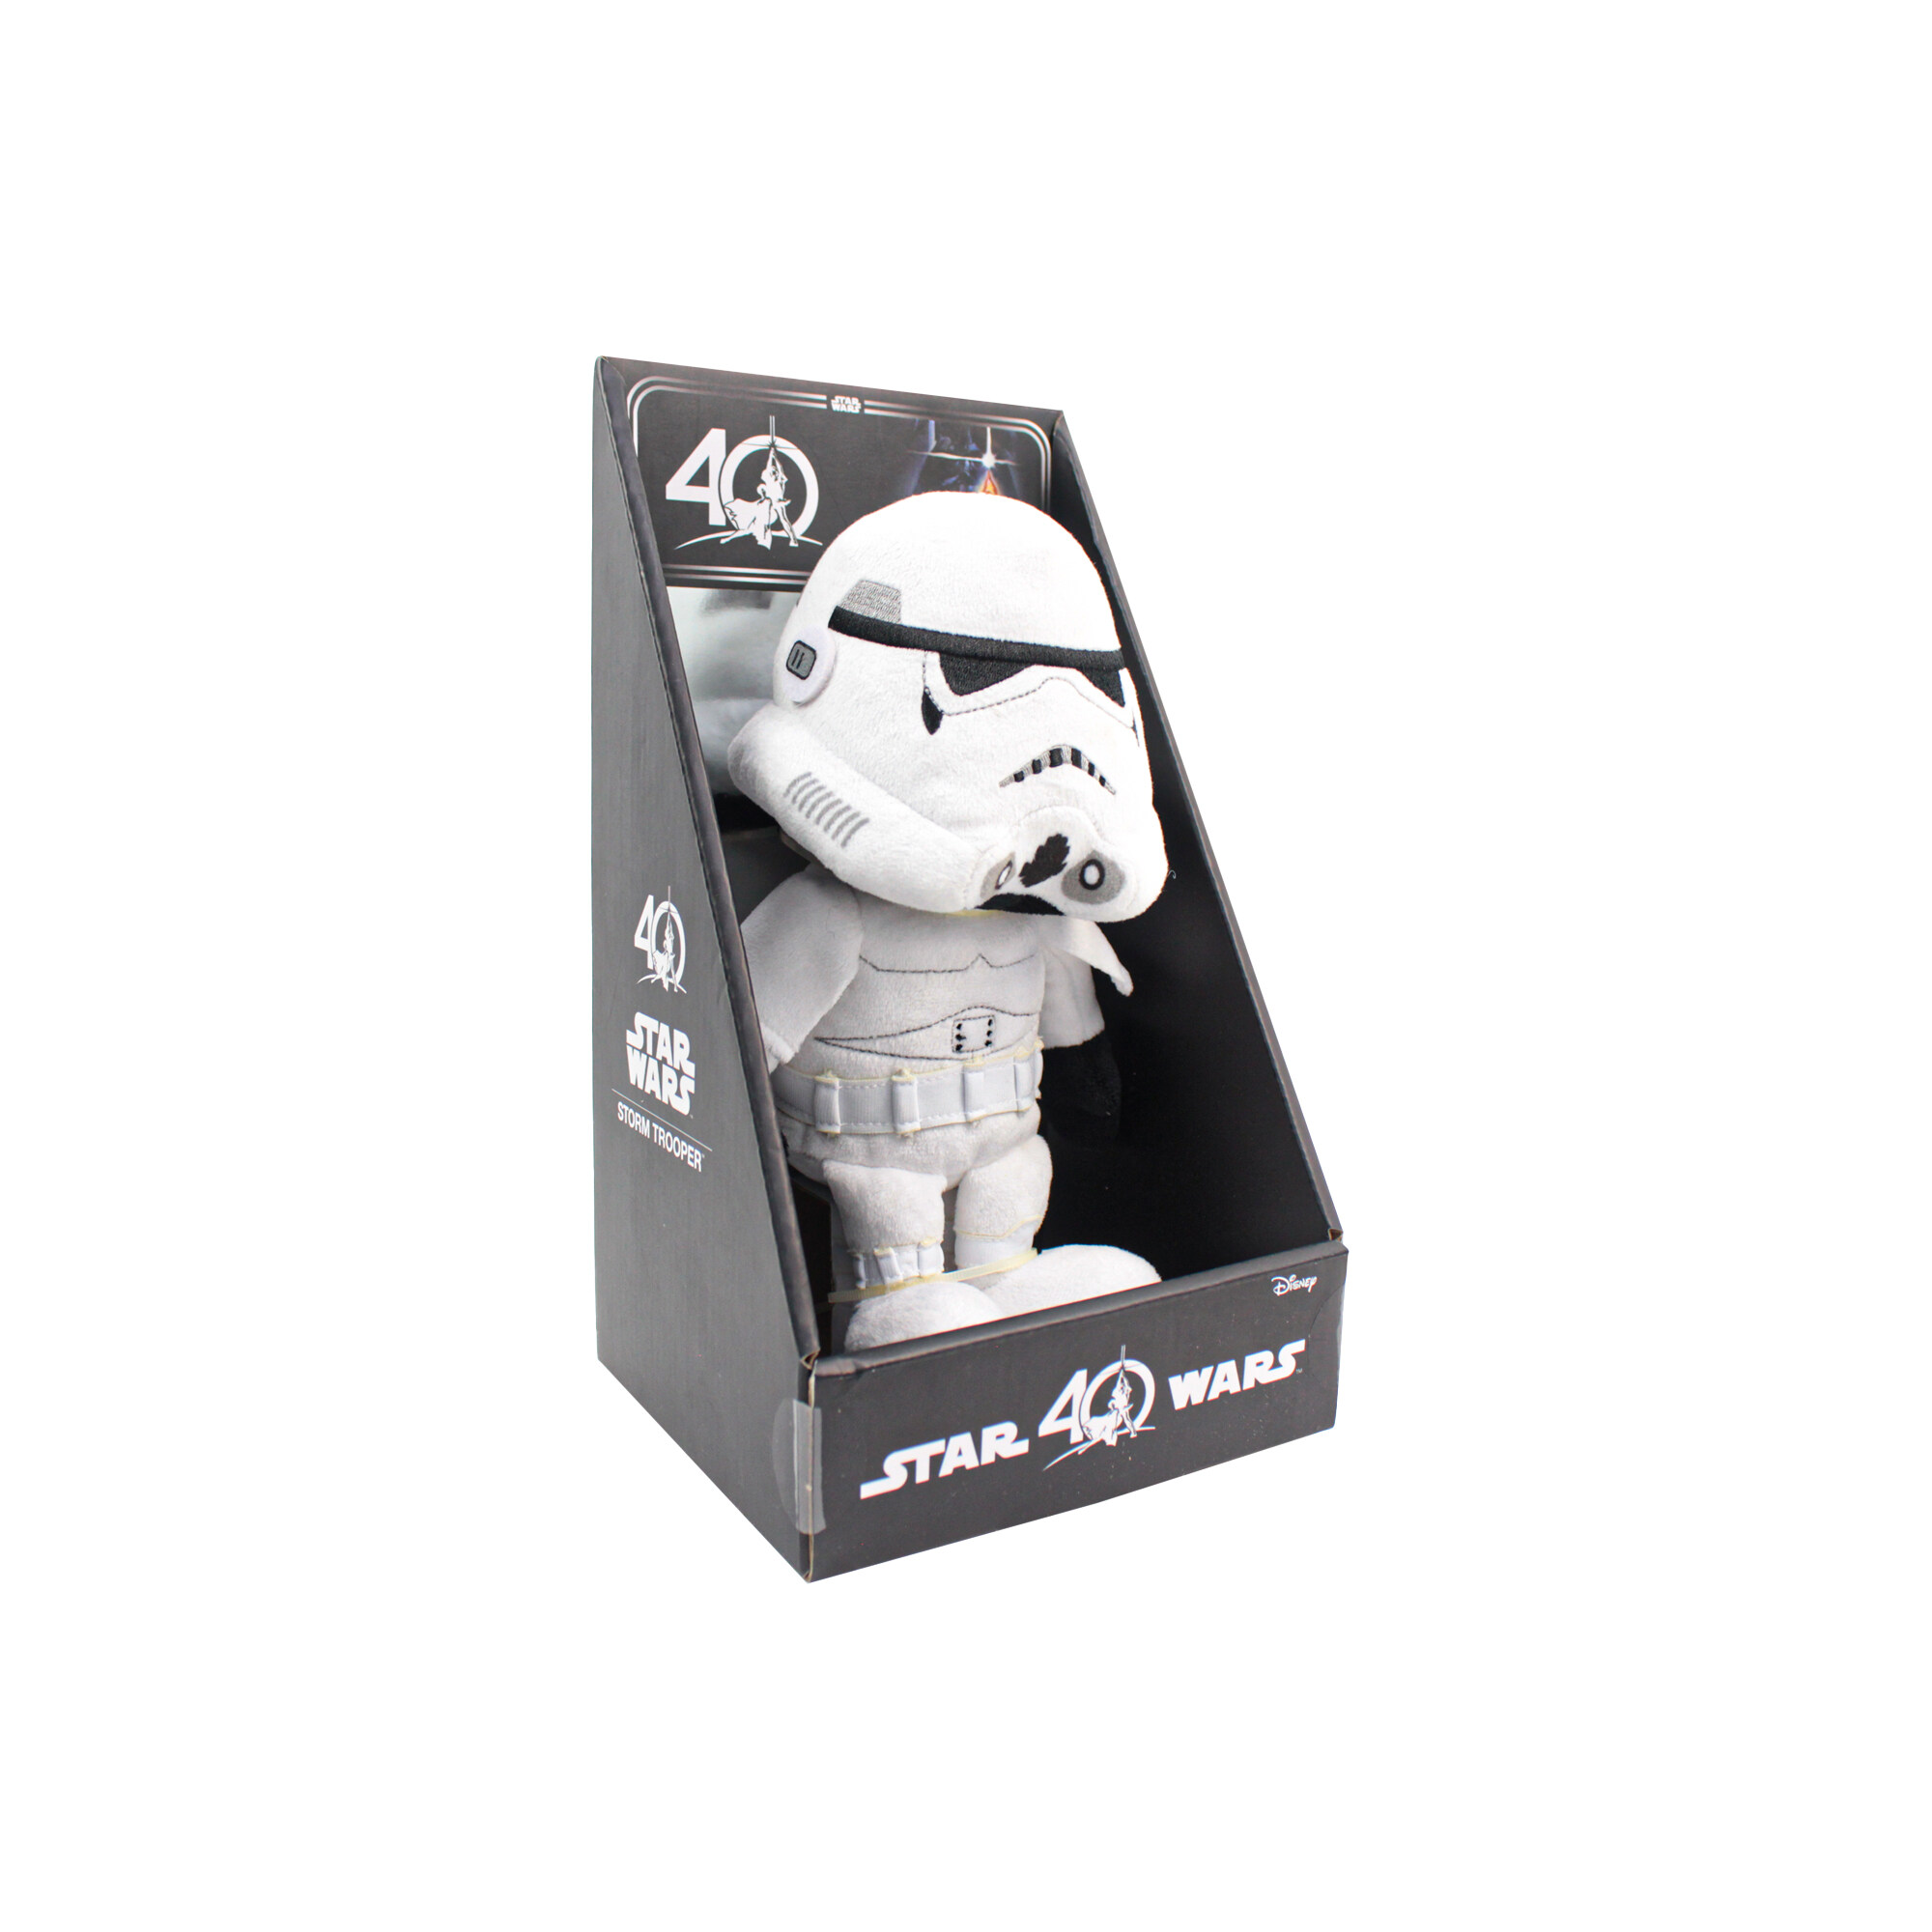 Disney Star Wars 75 Inch Storm Trooper Plush Doll  40th Anniversary For Hobbies  Collection-main-1